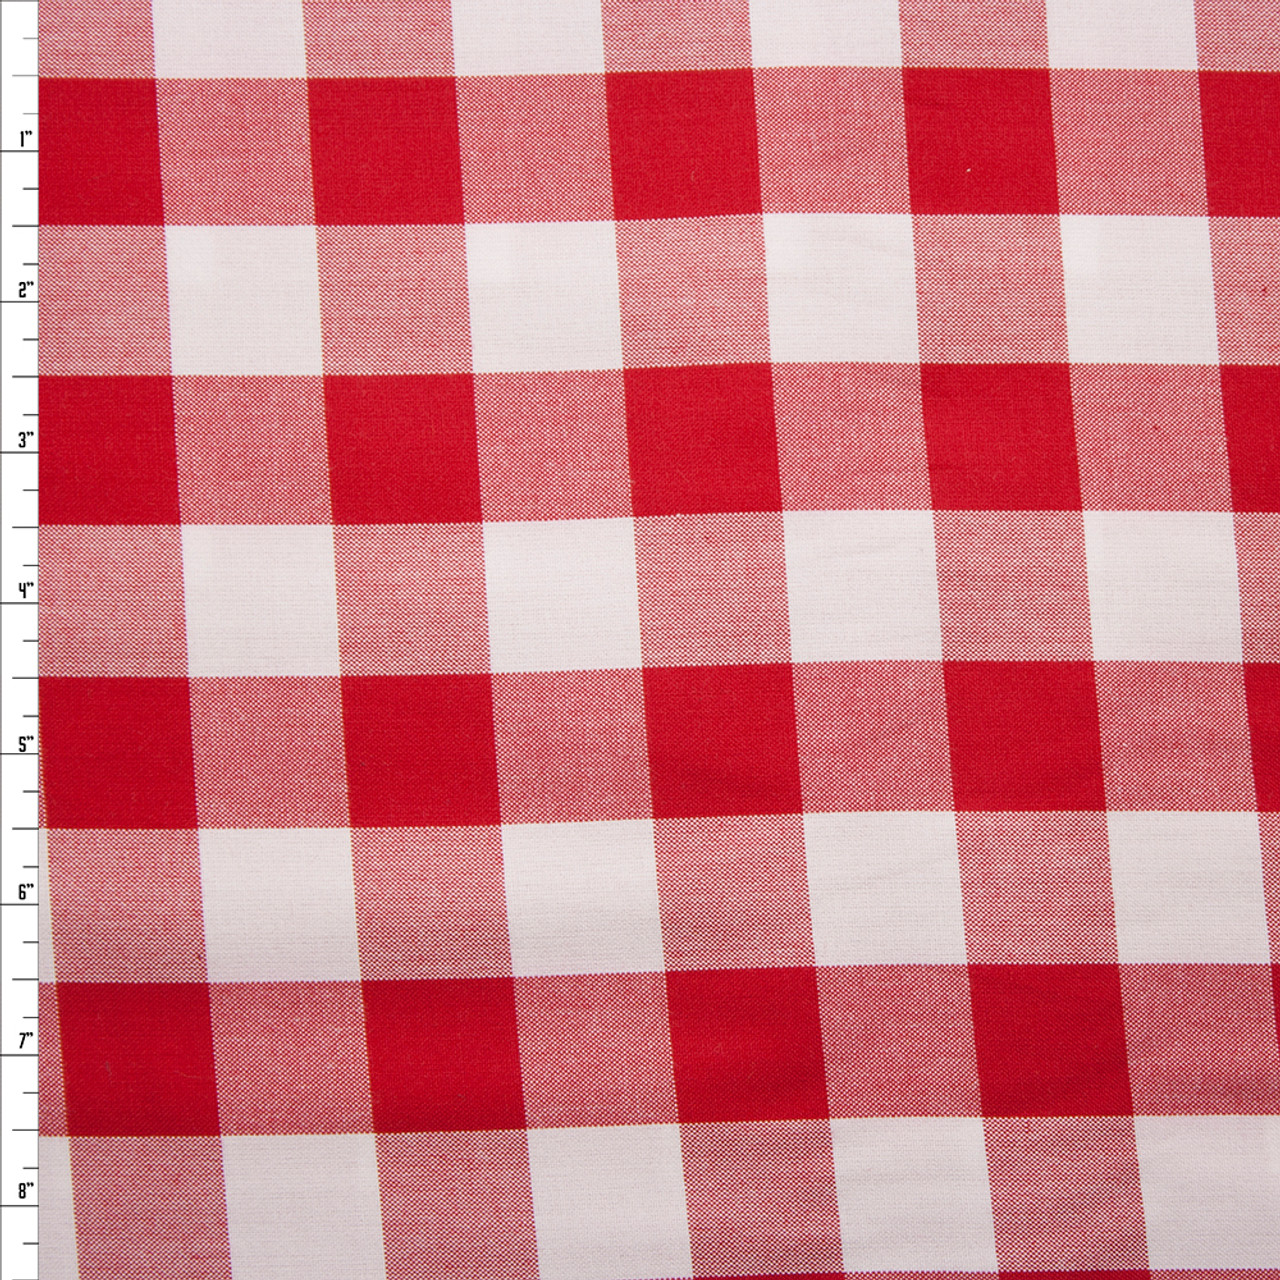 Red Gingham Fabric by the Yard, 1/8 Red and White Checked Fabric, Robert  Kaufman Carolina Gingham Fabric, 100% Cotton Fabric 